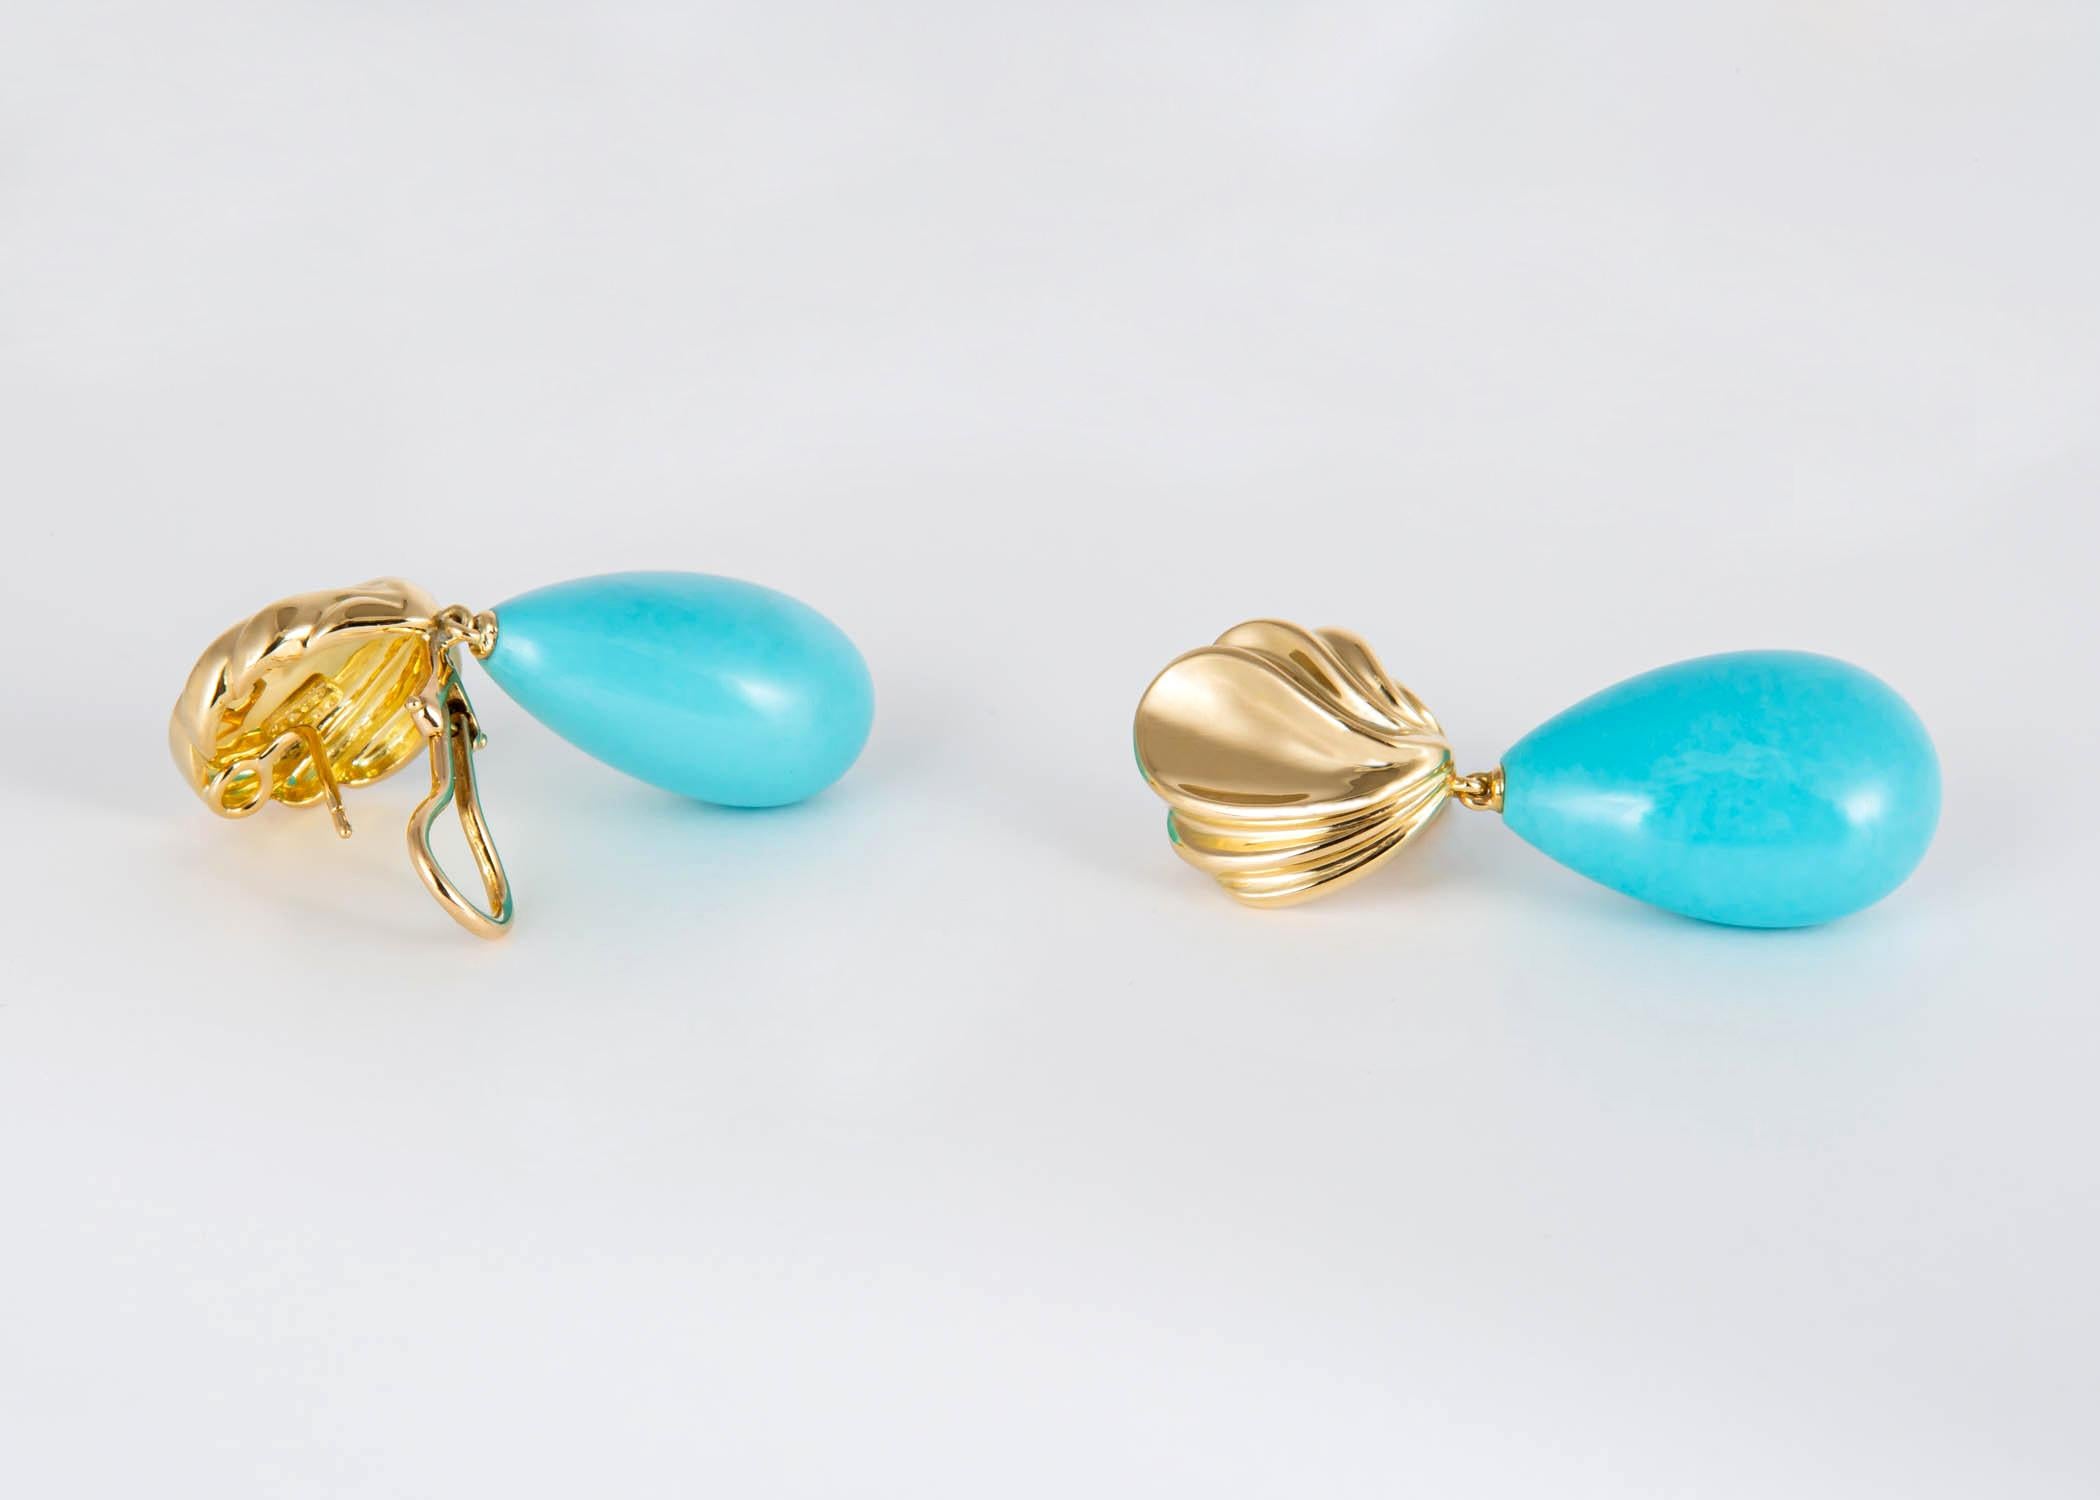 A matched pair of drop shaped natural turquoise absolutely vivid in color. Tiffany design and quality all the way. Exceptional. 1 5/8's inches in length.